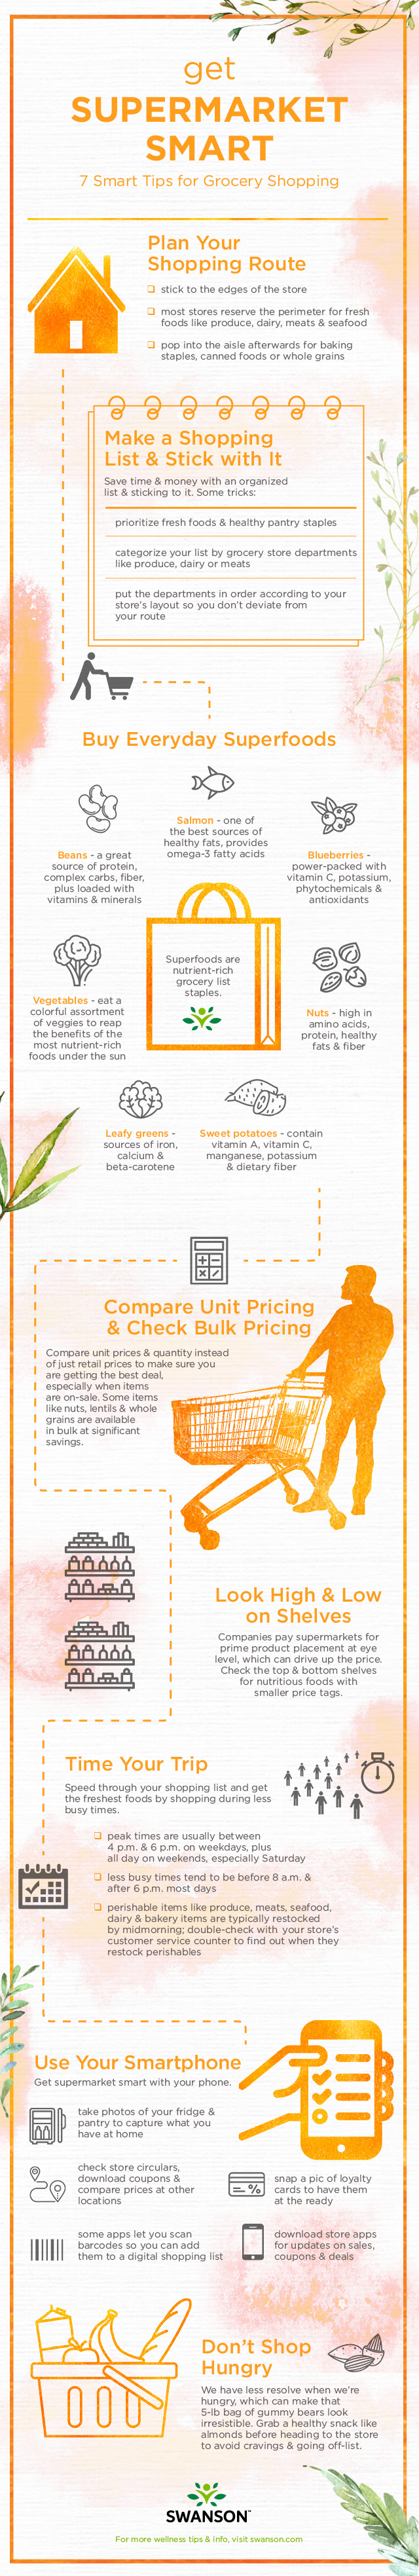 Get Supermarket Smart - Grocery Store Hacks to Save Money and Time - infographic by Swanson Health